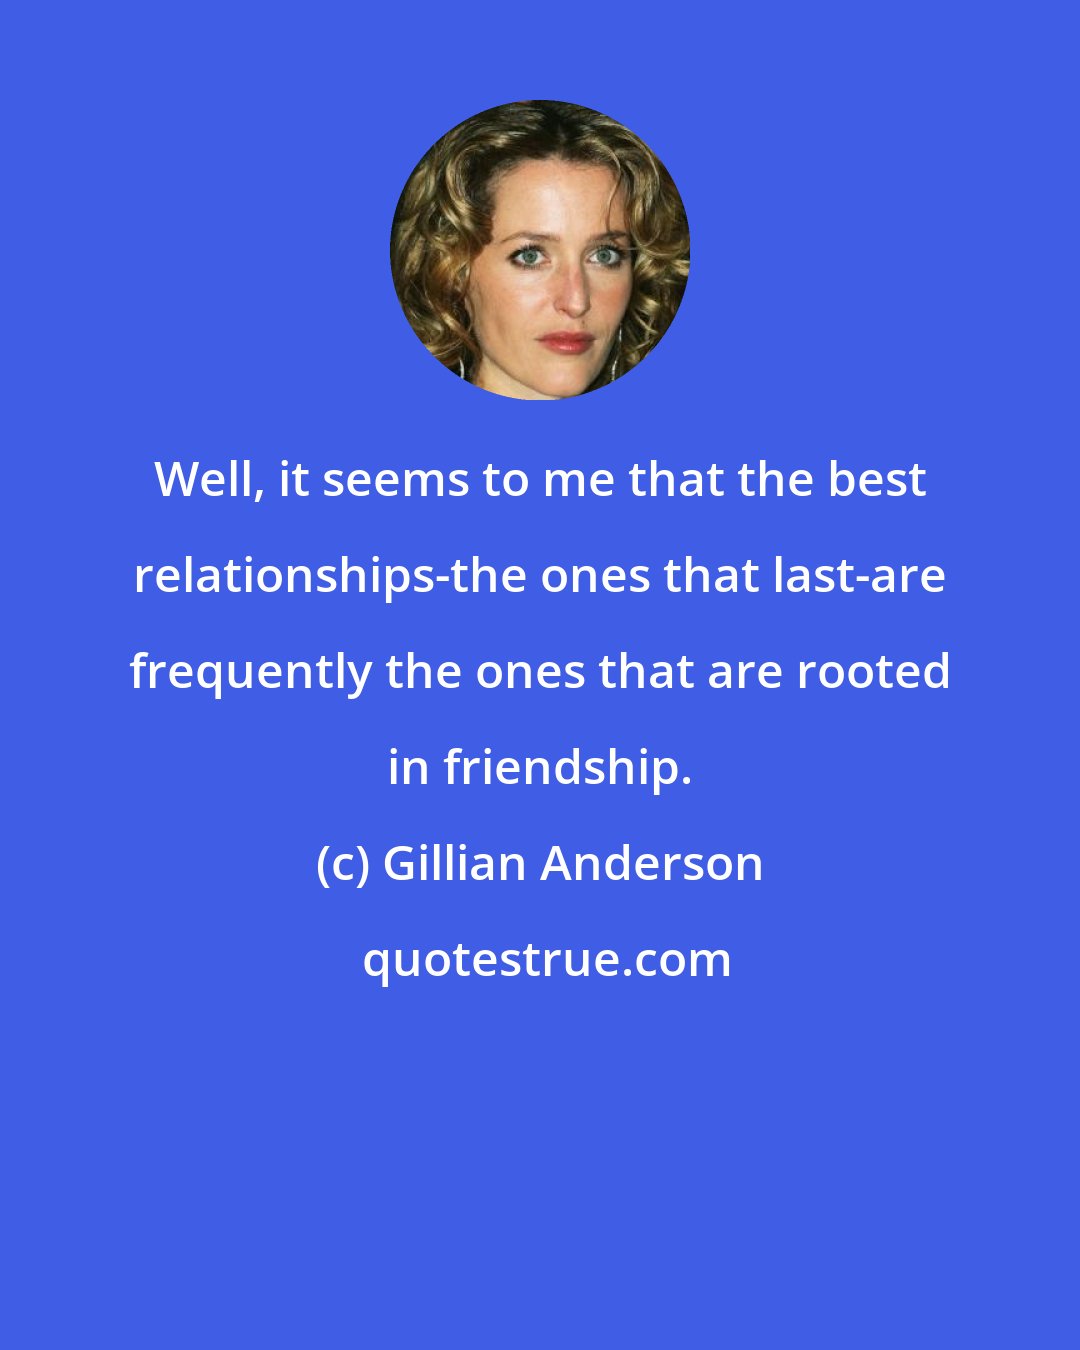 Gillian Anderson: Well, it seems to me that the best relationships-the ones that last-are frequently the ones that are rooted in friendship.